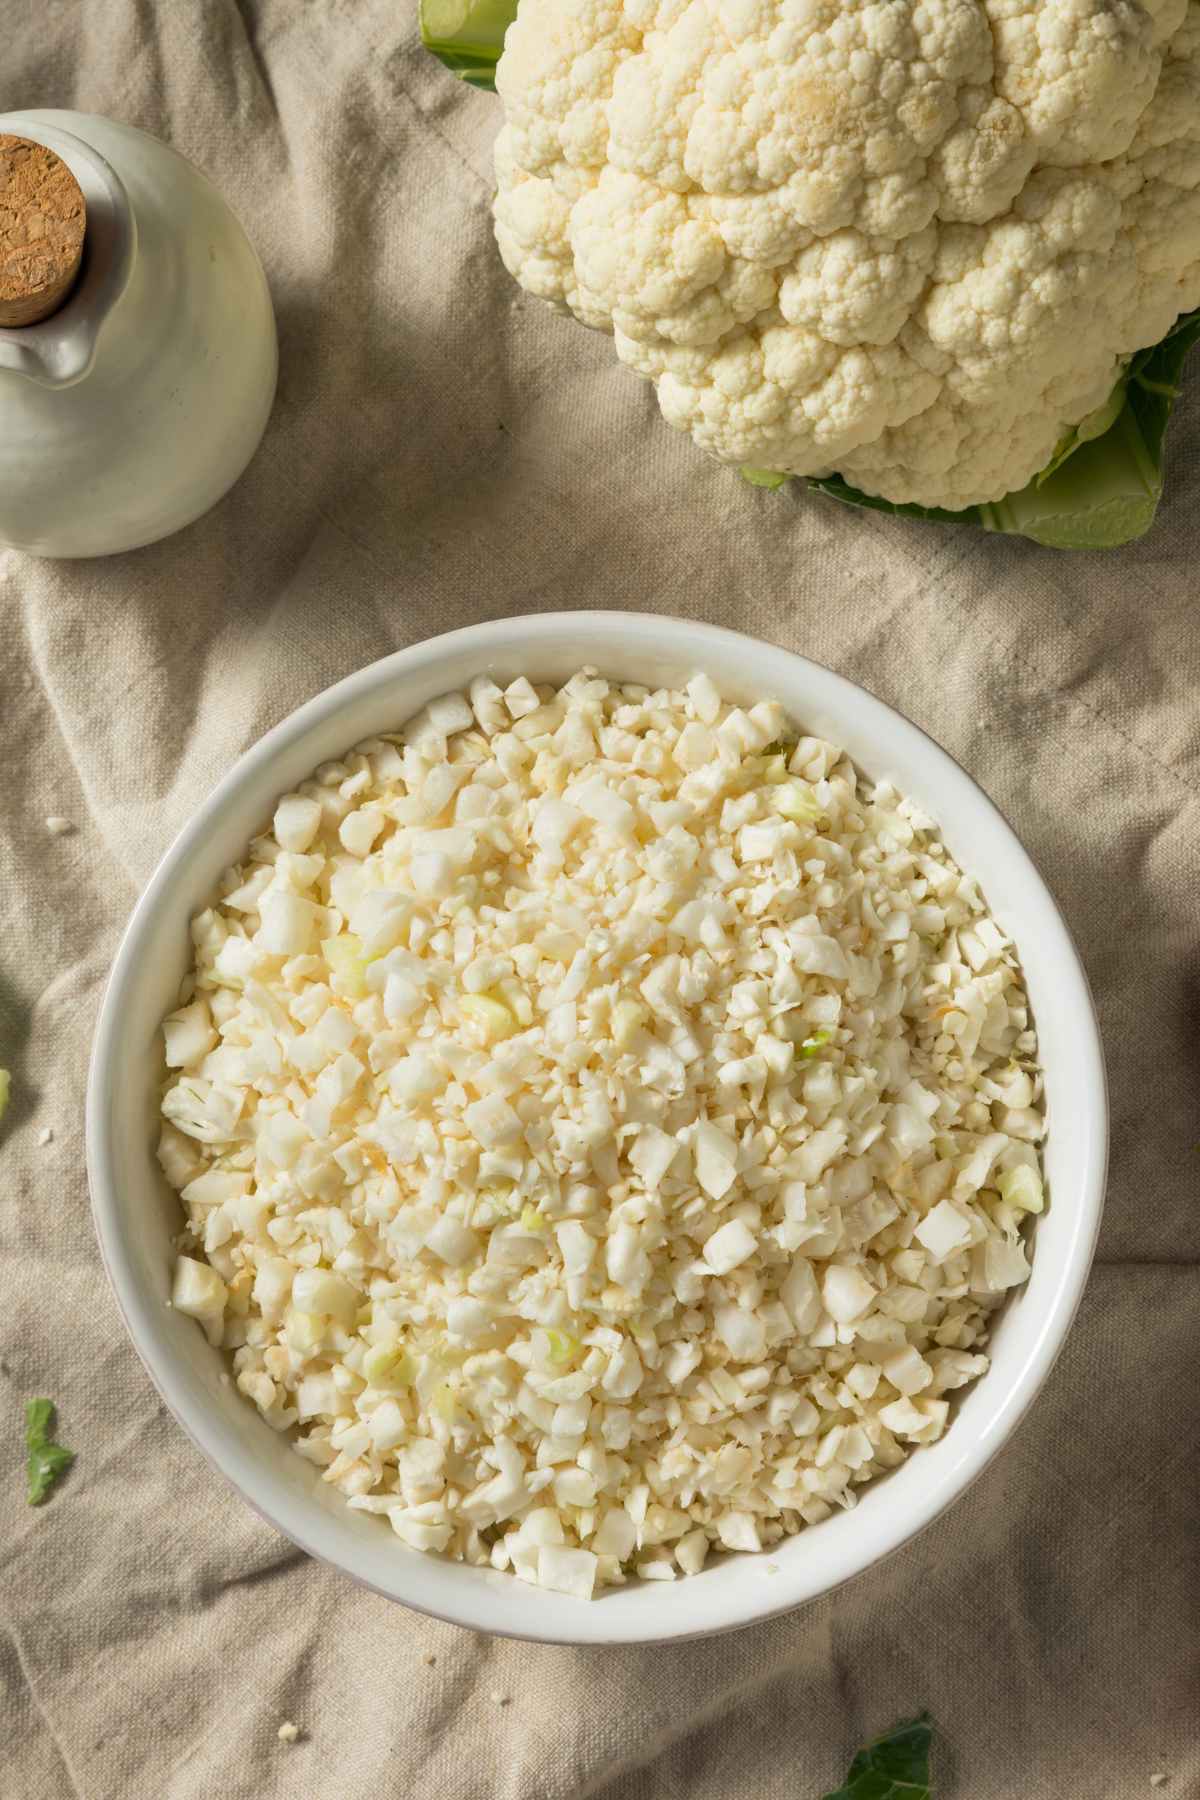 Cauliflower rice is a popular low-carb alternative to traditional rice, but is it keto-friendly? In this article, we will explore the nutritional value of cauliflower rice, its benefits, and share some low-carb keto cauliflower rice recipes with you.